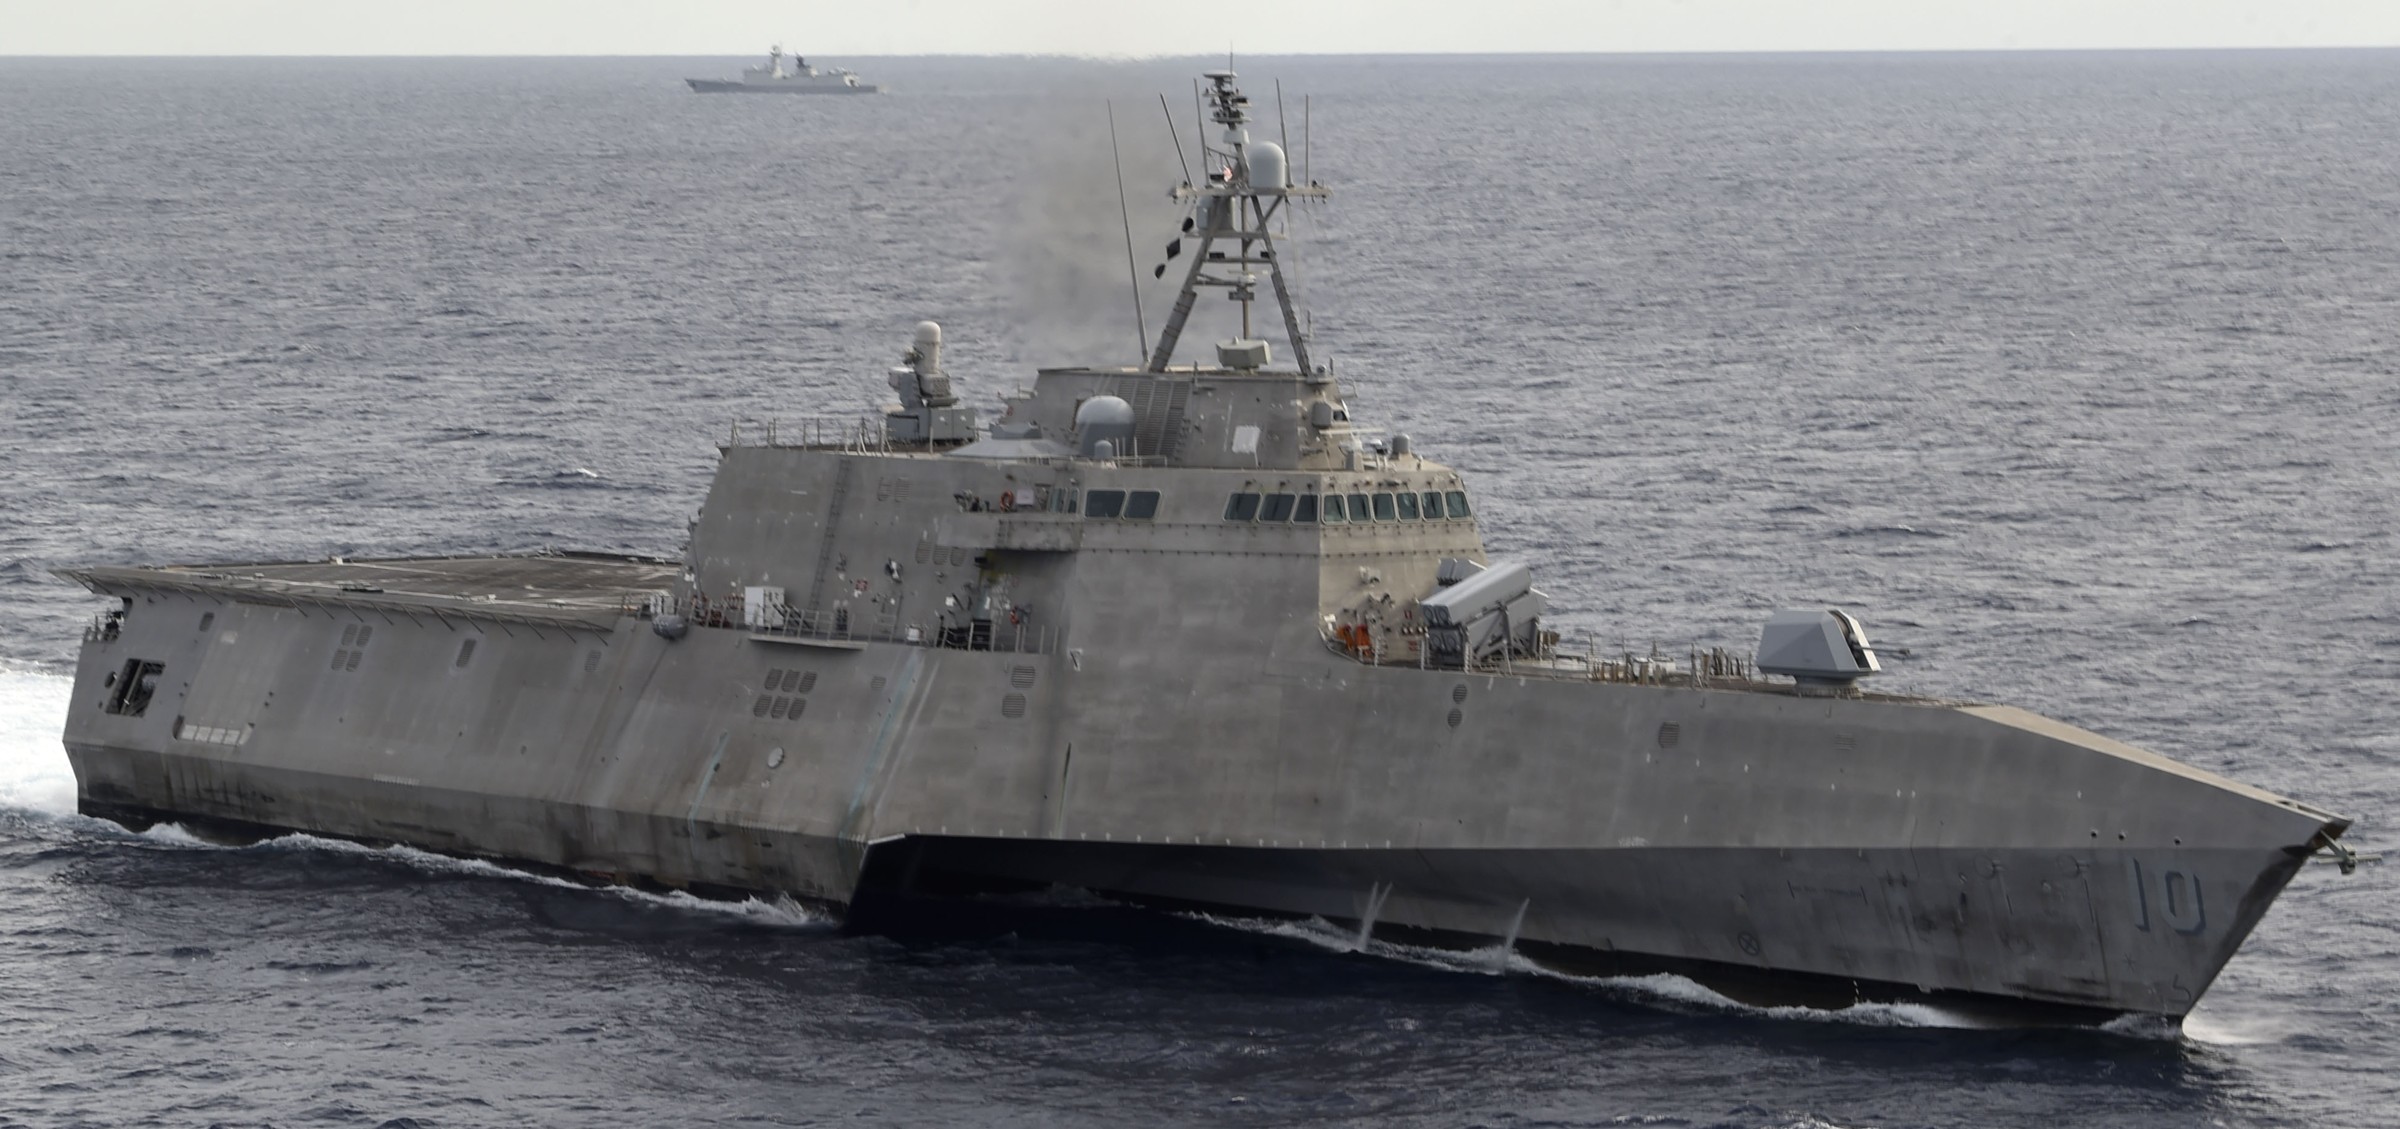 lcs-10 uss gabrielle giffords littoral combat ship independence class us navy 65 south china sea